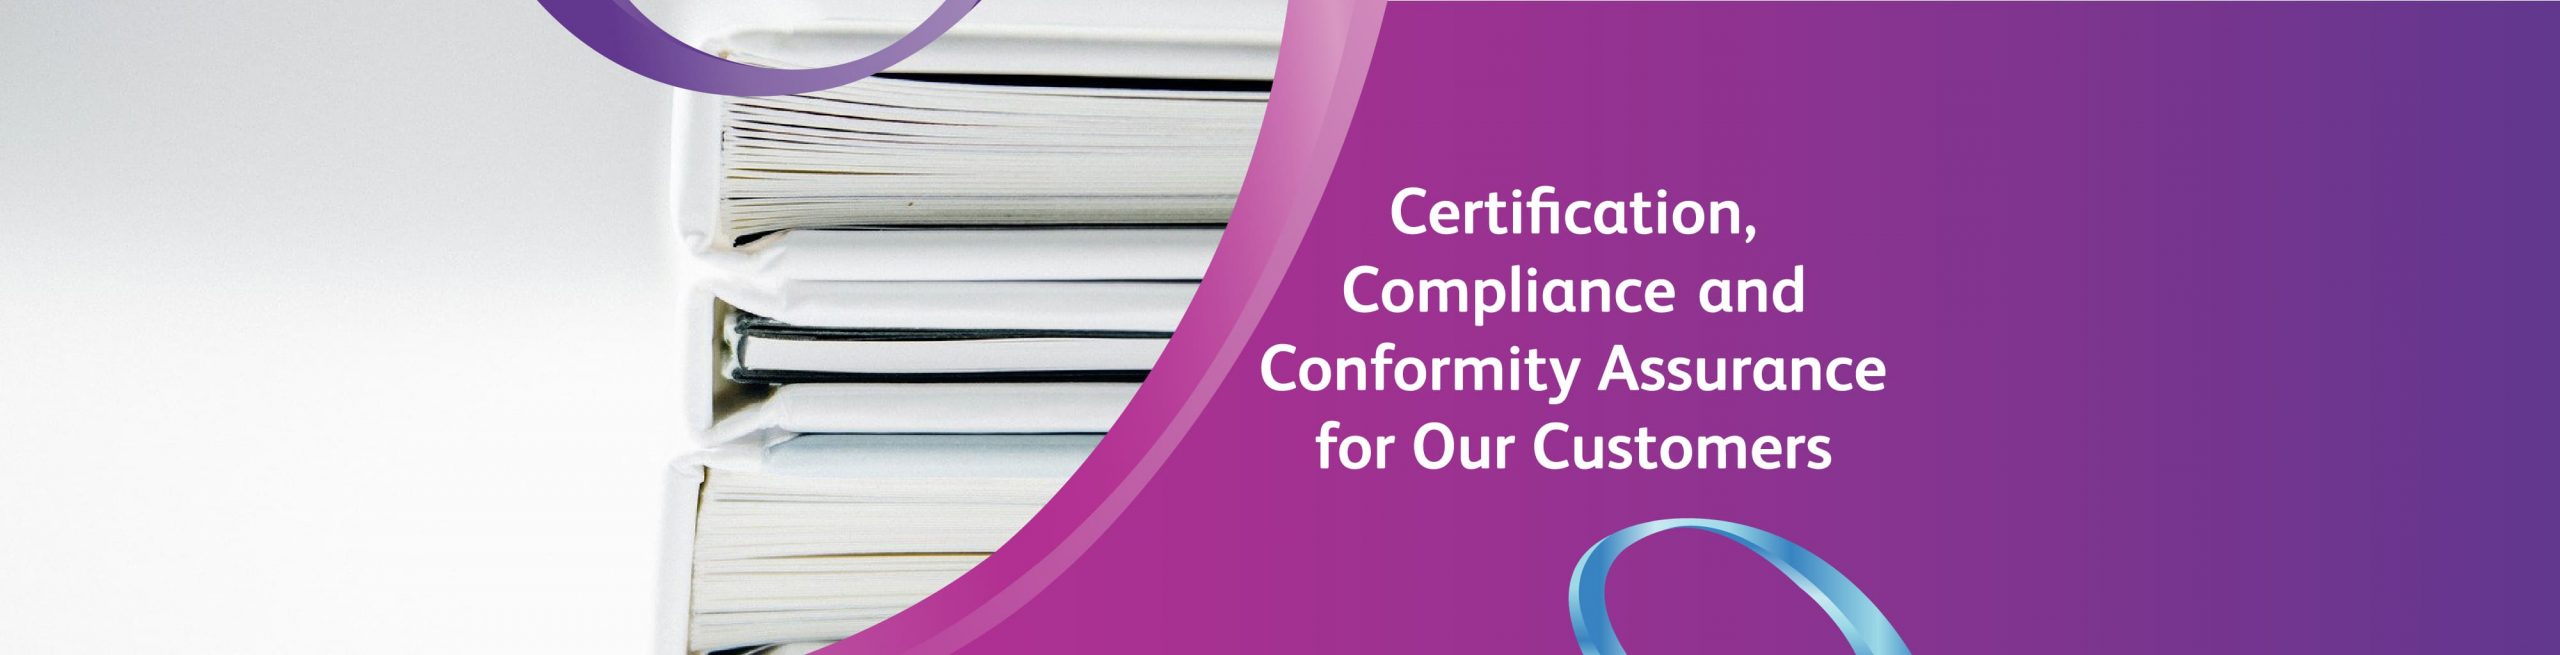 Certificates of Compliance for Our Customers Assurance banner